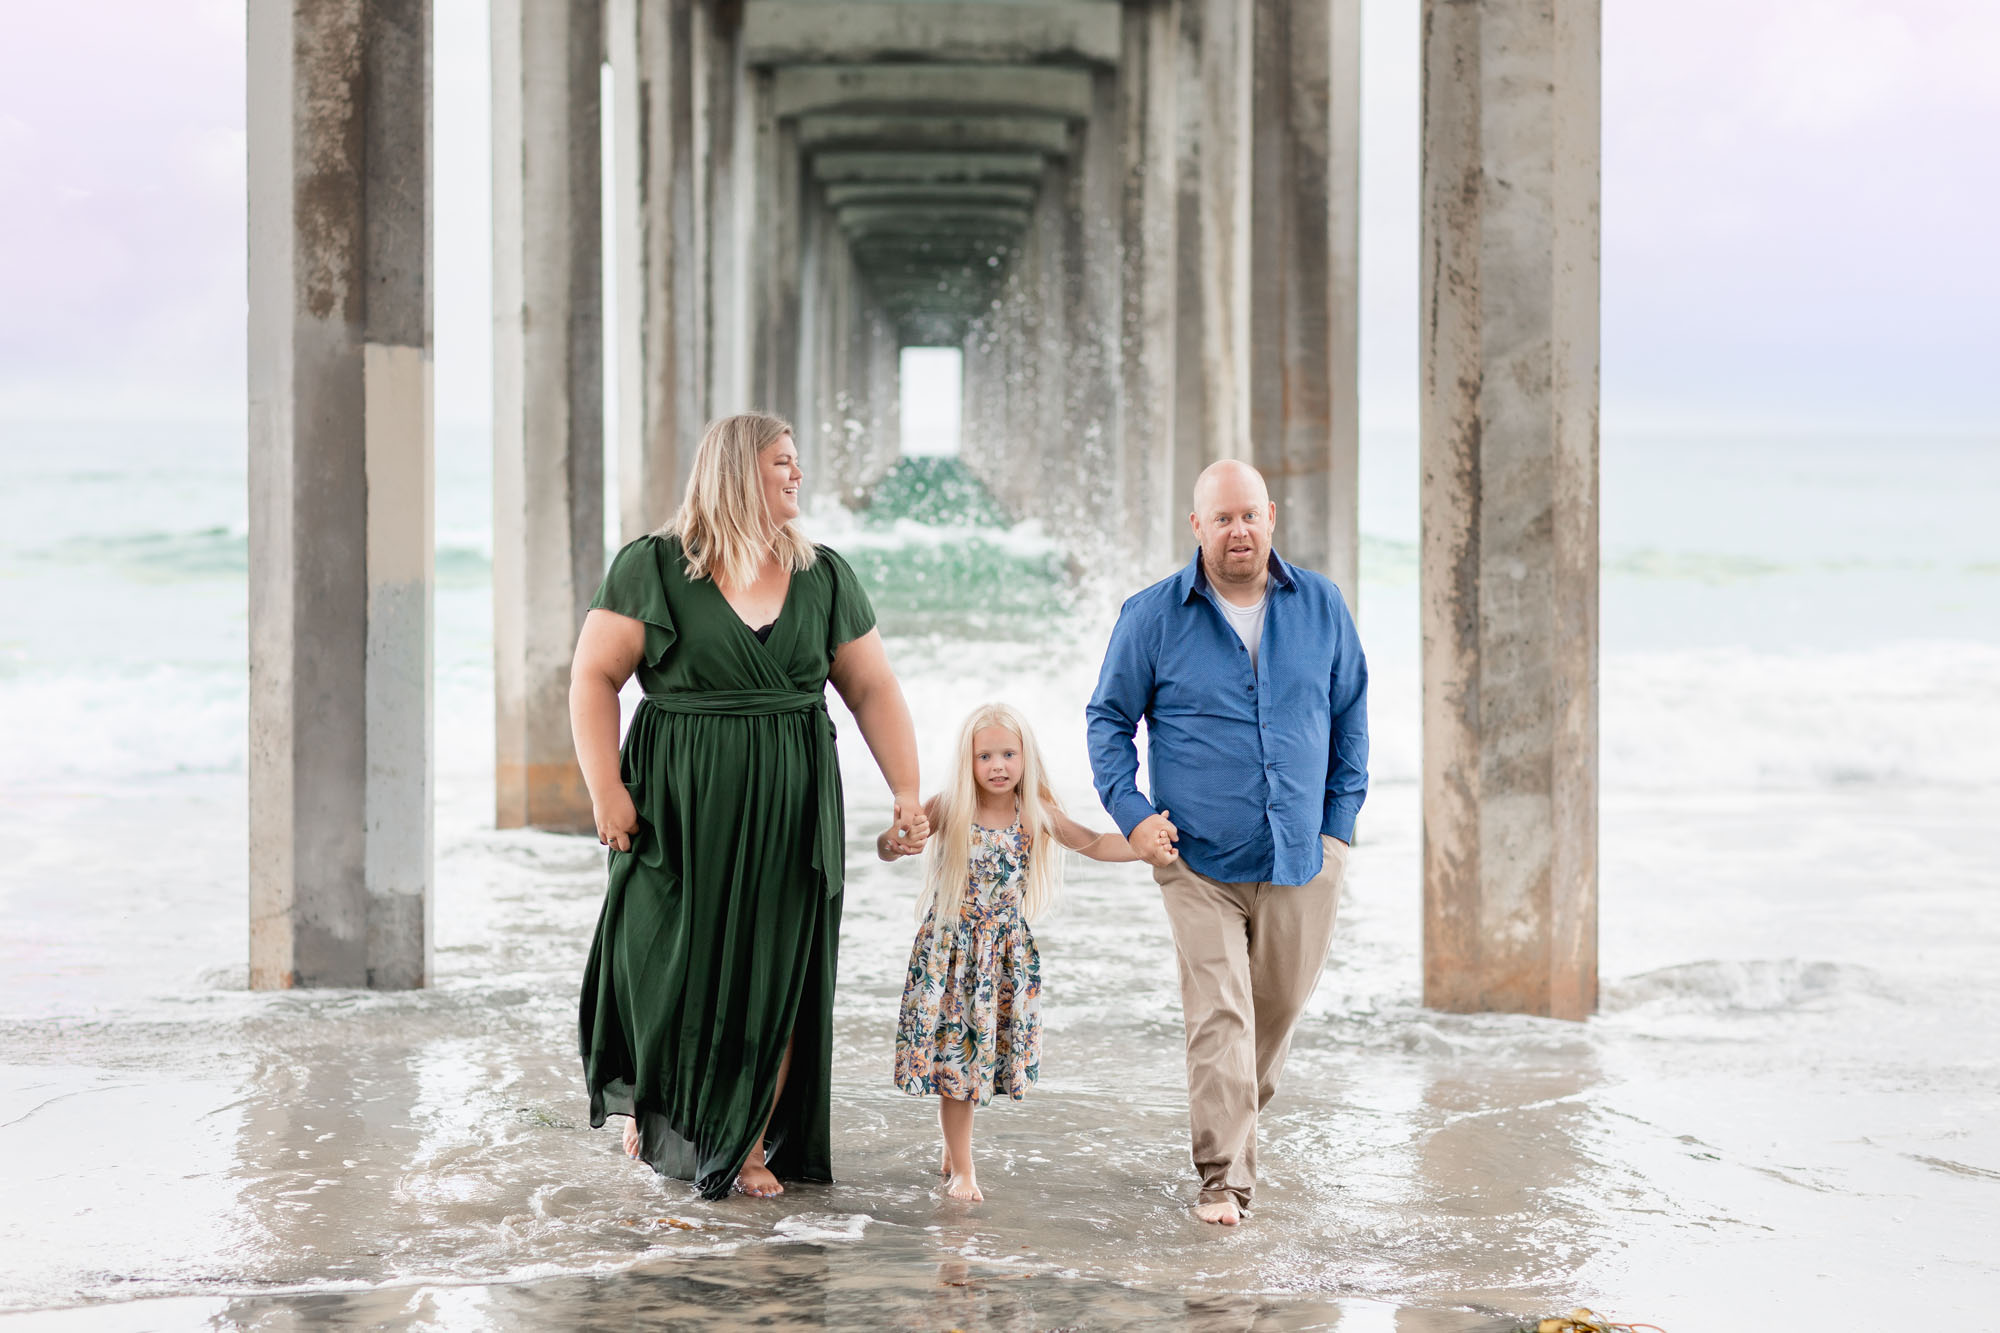 La Jolla Scripps Pier Sunset Family Photos with vacationing family by San Diego Family Photographer